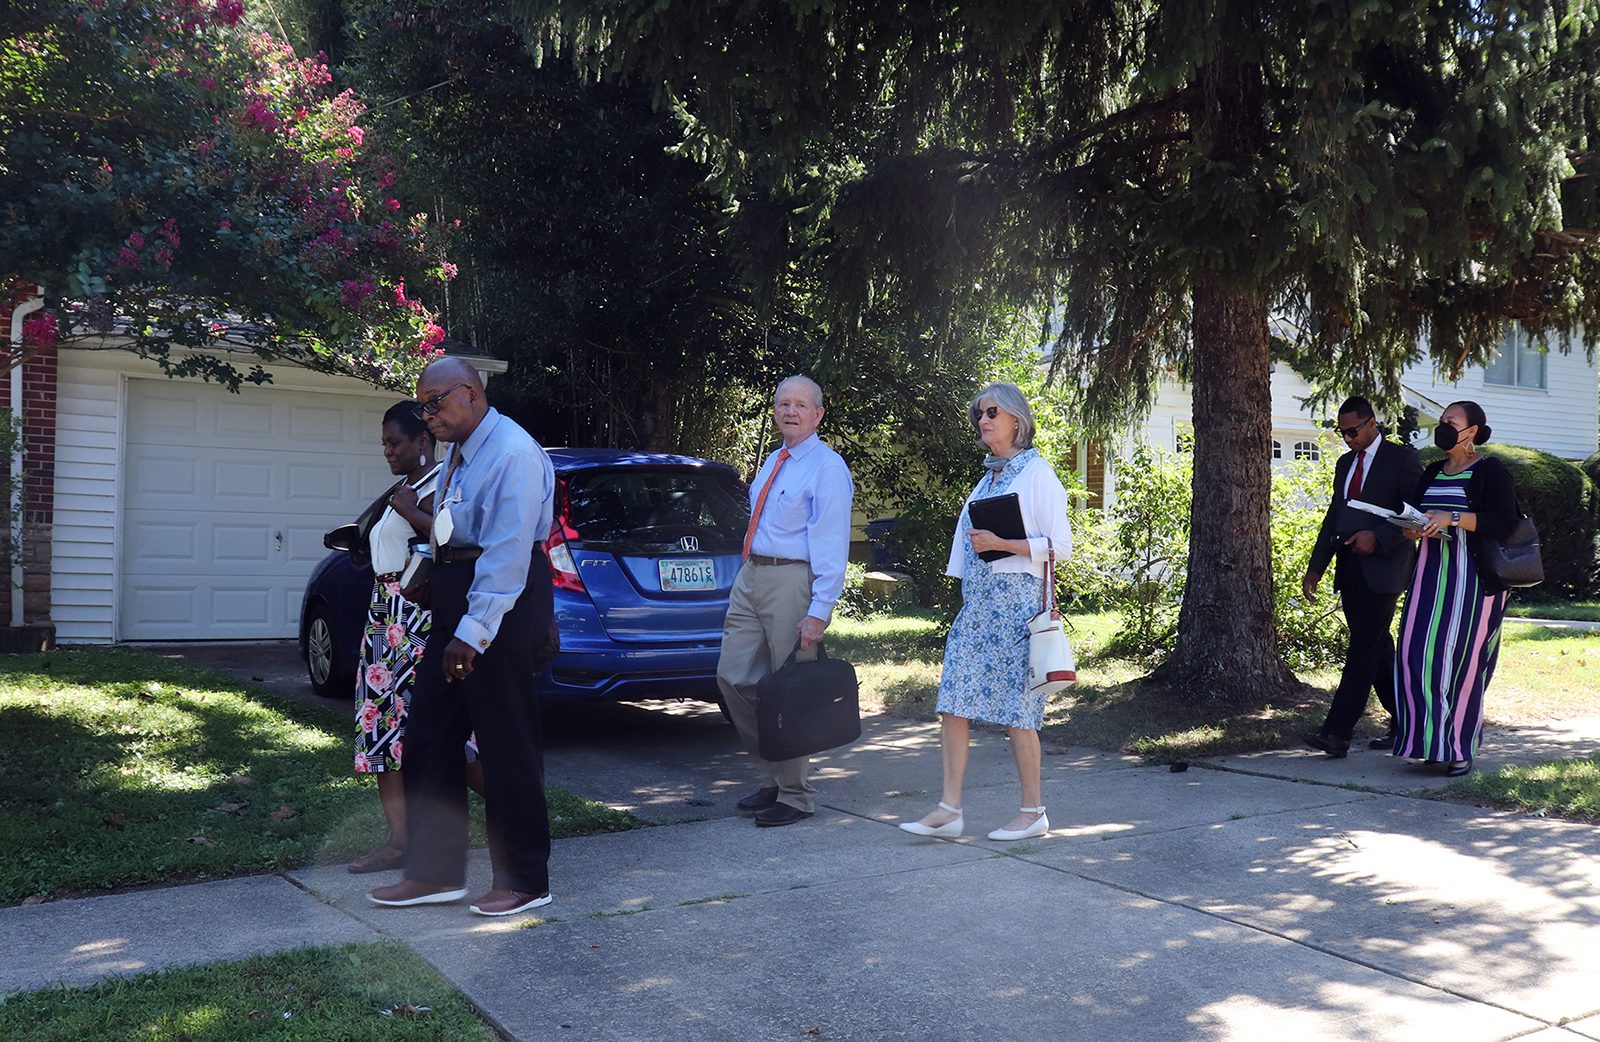 A group of Jehovah’s Witnesses from the Kingdom Hall in Silver Spring, Maryland, returned to door knocking in in their community on Thursday, Sept. 1, 2022. RNS photo by Adelle M. Banks